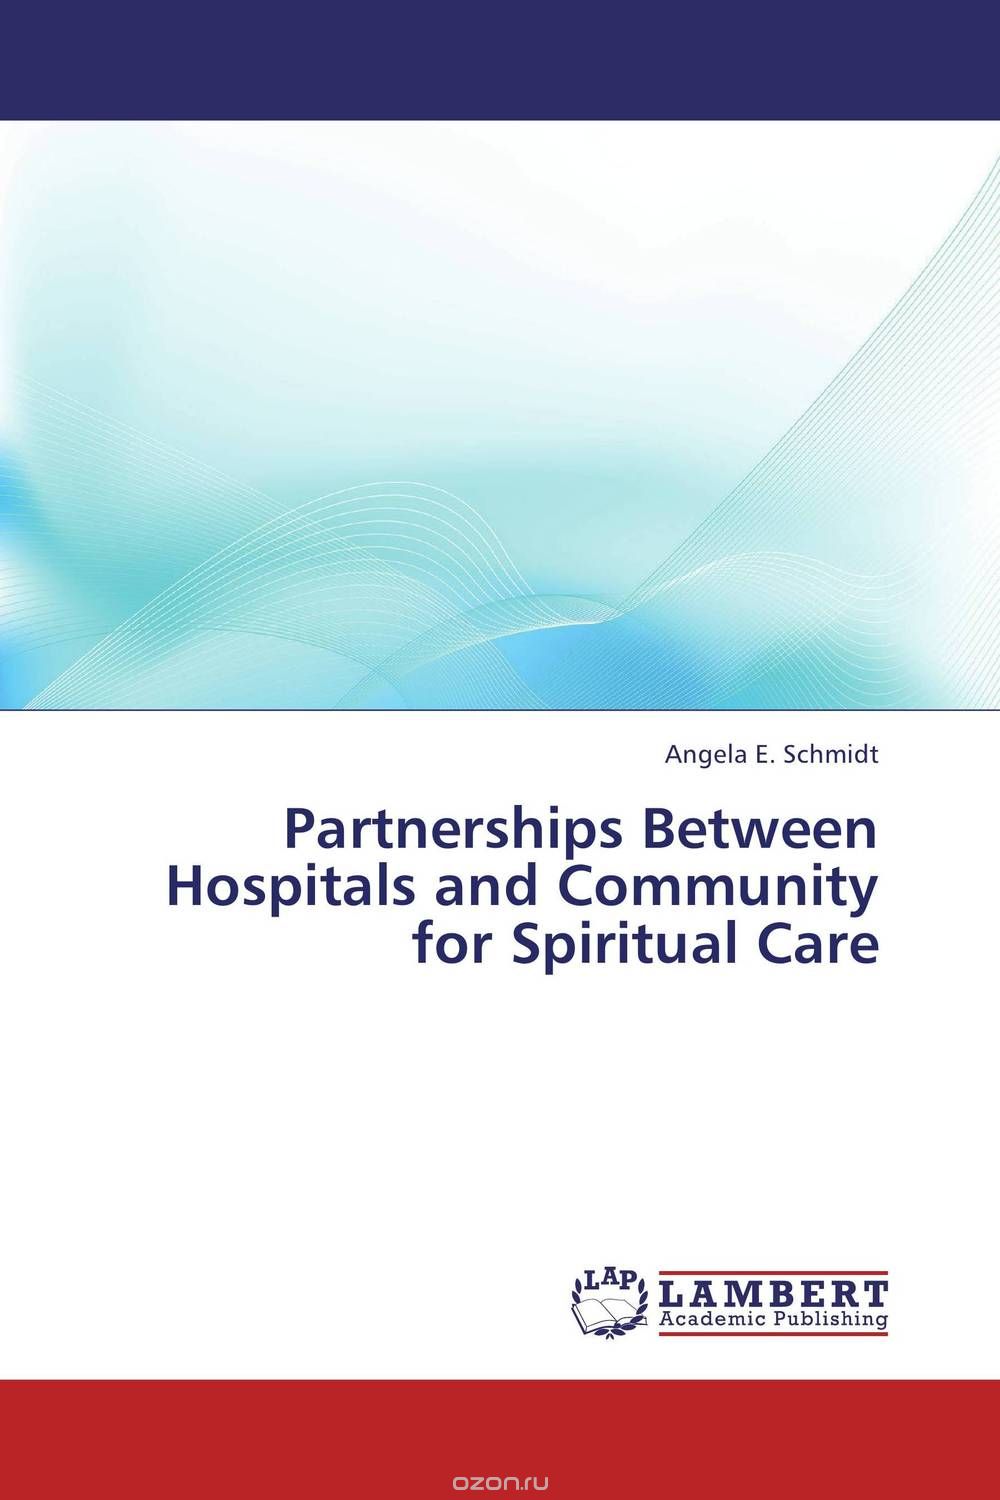 Partnerships Between Hospitals and Community for Spiritual Care